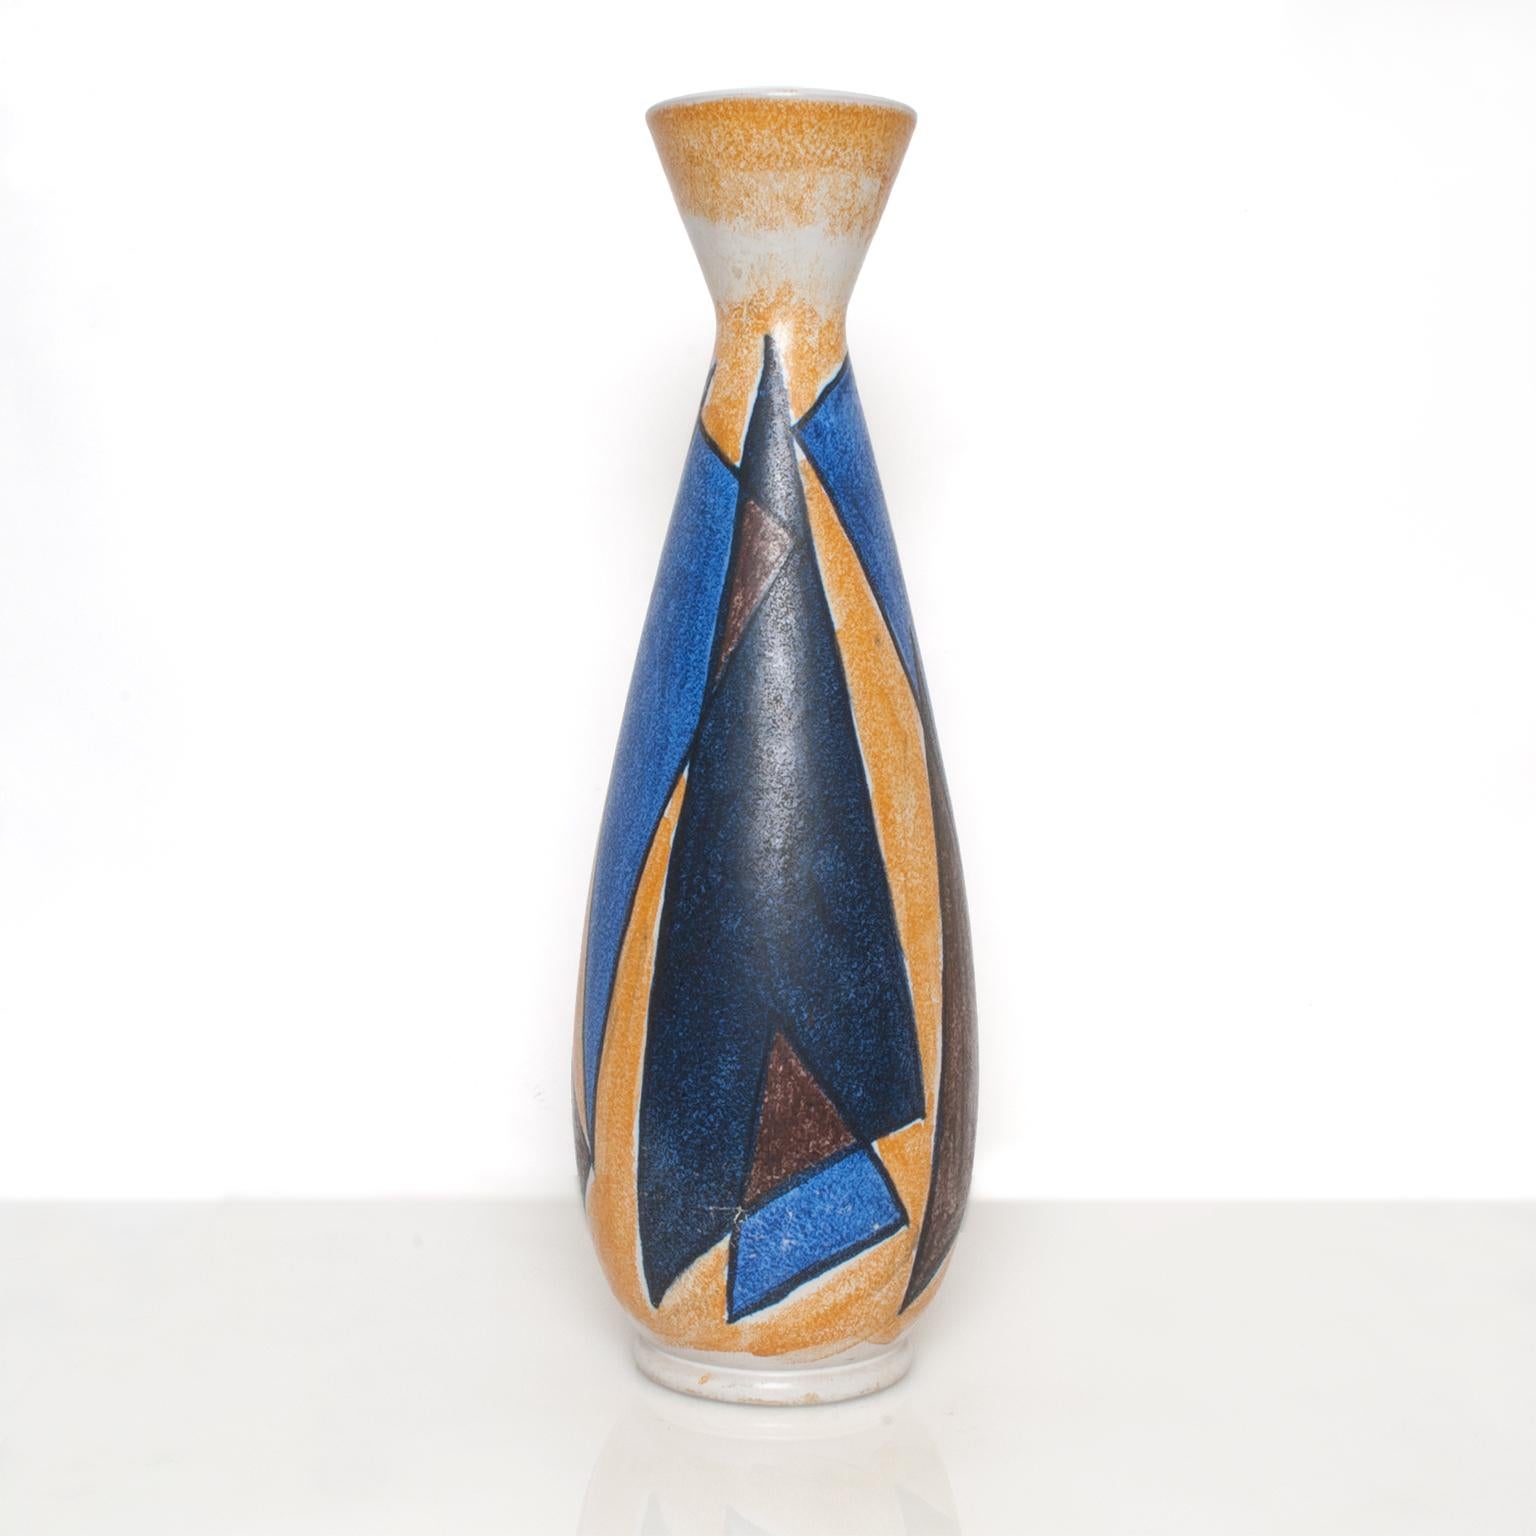 Large Scandinavian modern ceramic vase with abstract design by Mette Doller and form designed by Ivar Ericsson for Hoganas, Sweden. Measures: Height 20.5